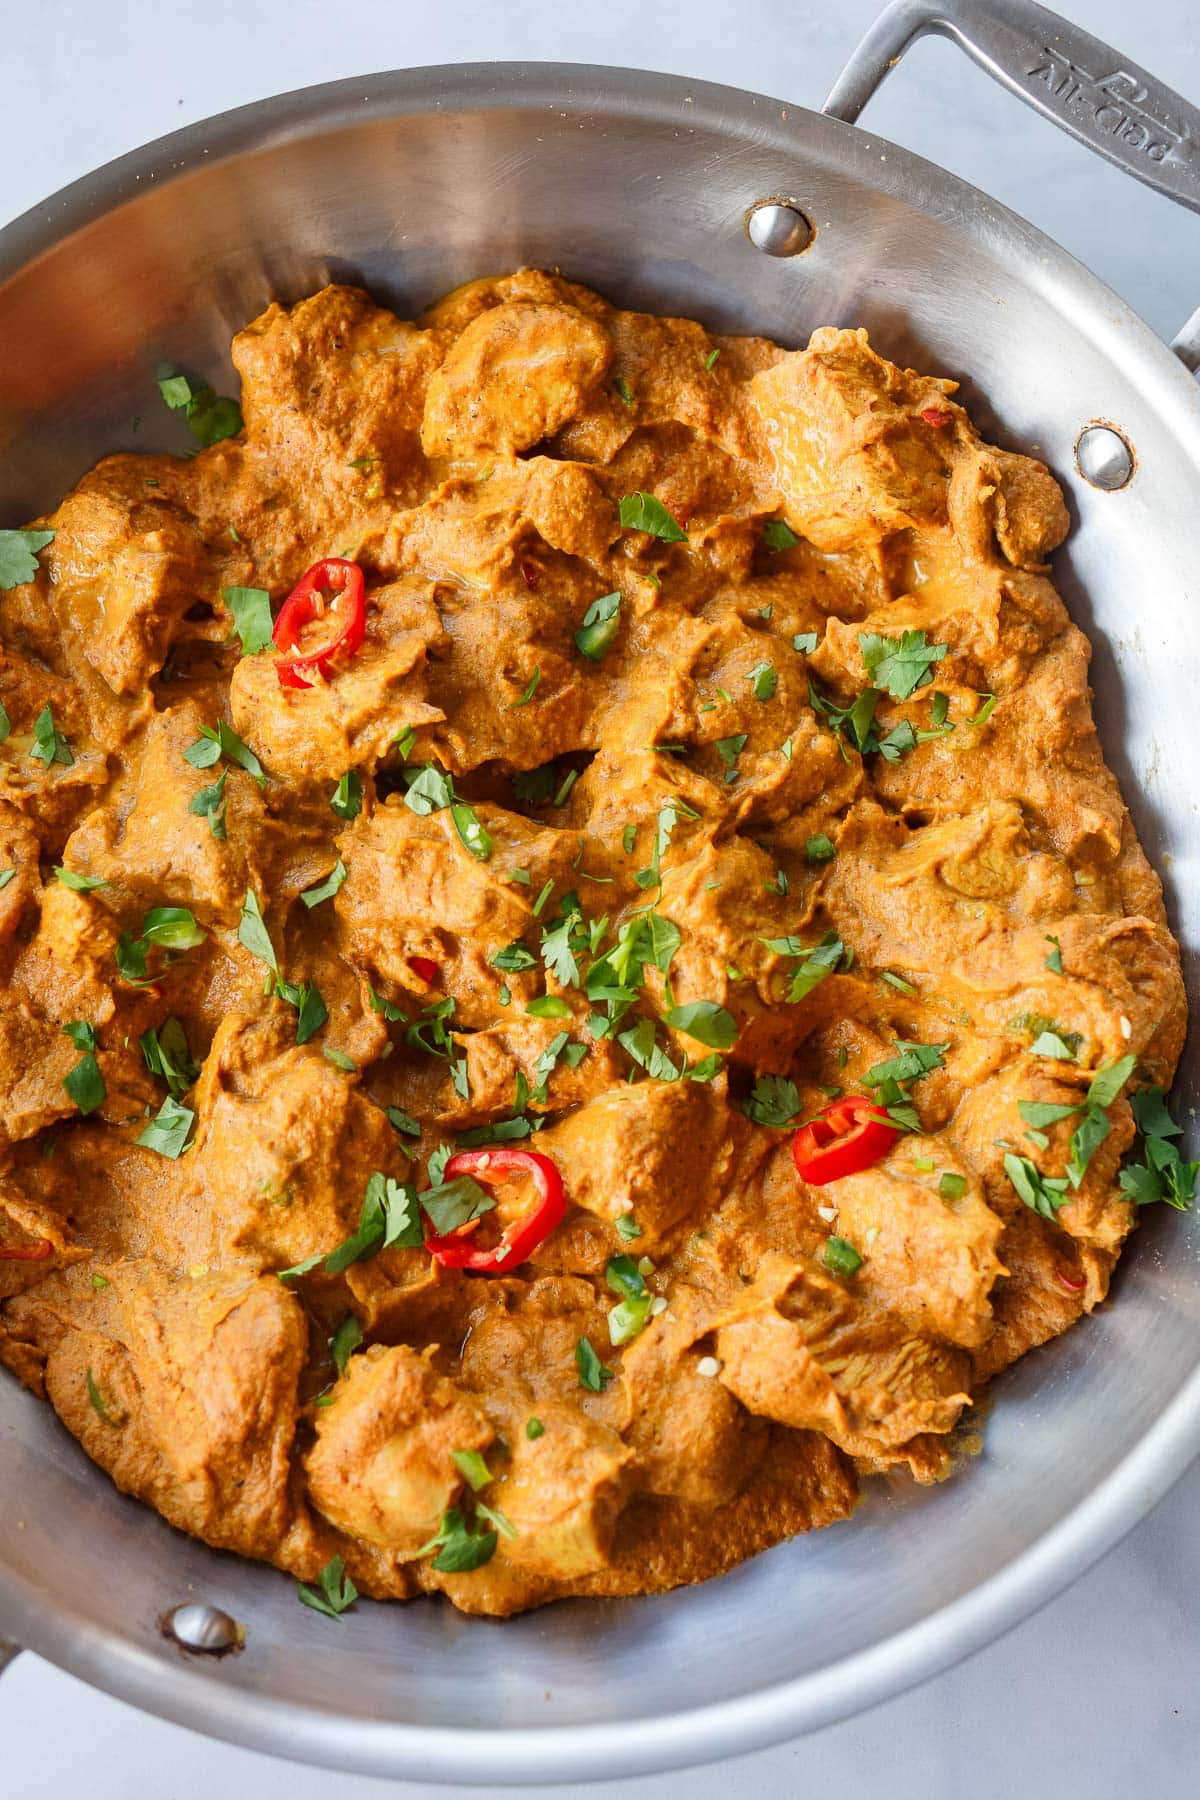 chicken korma with thick and creamy sauce simmering in skillet, garnished with sliced chilies and fresh herbs